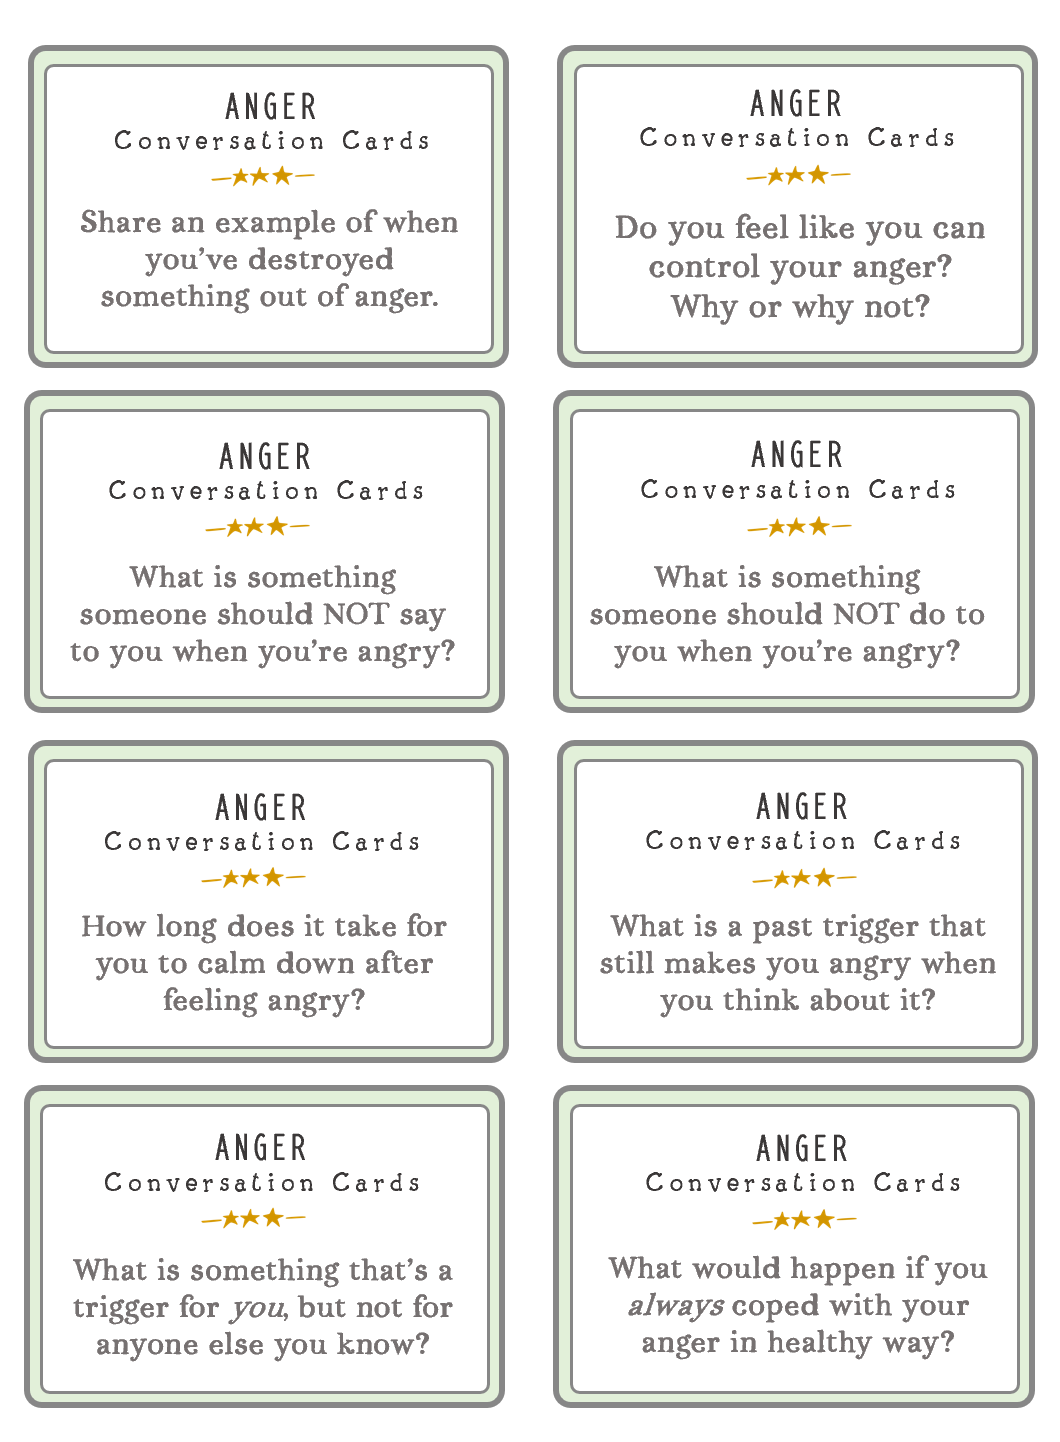 Anger Conversation Cards